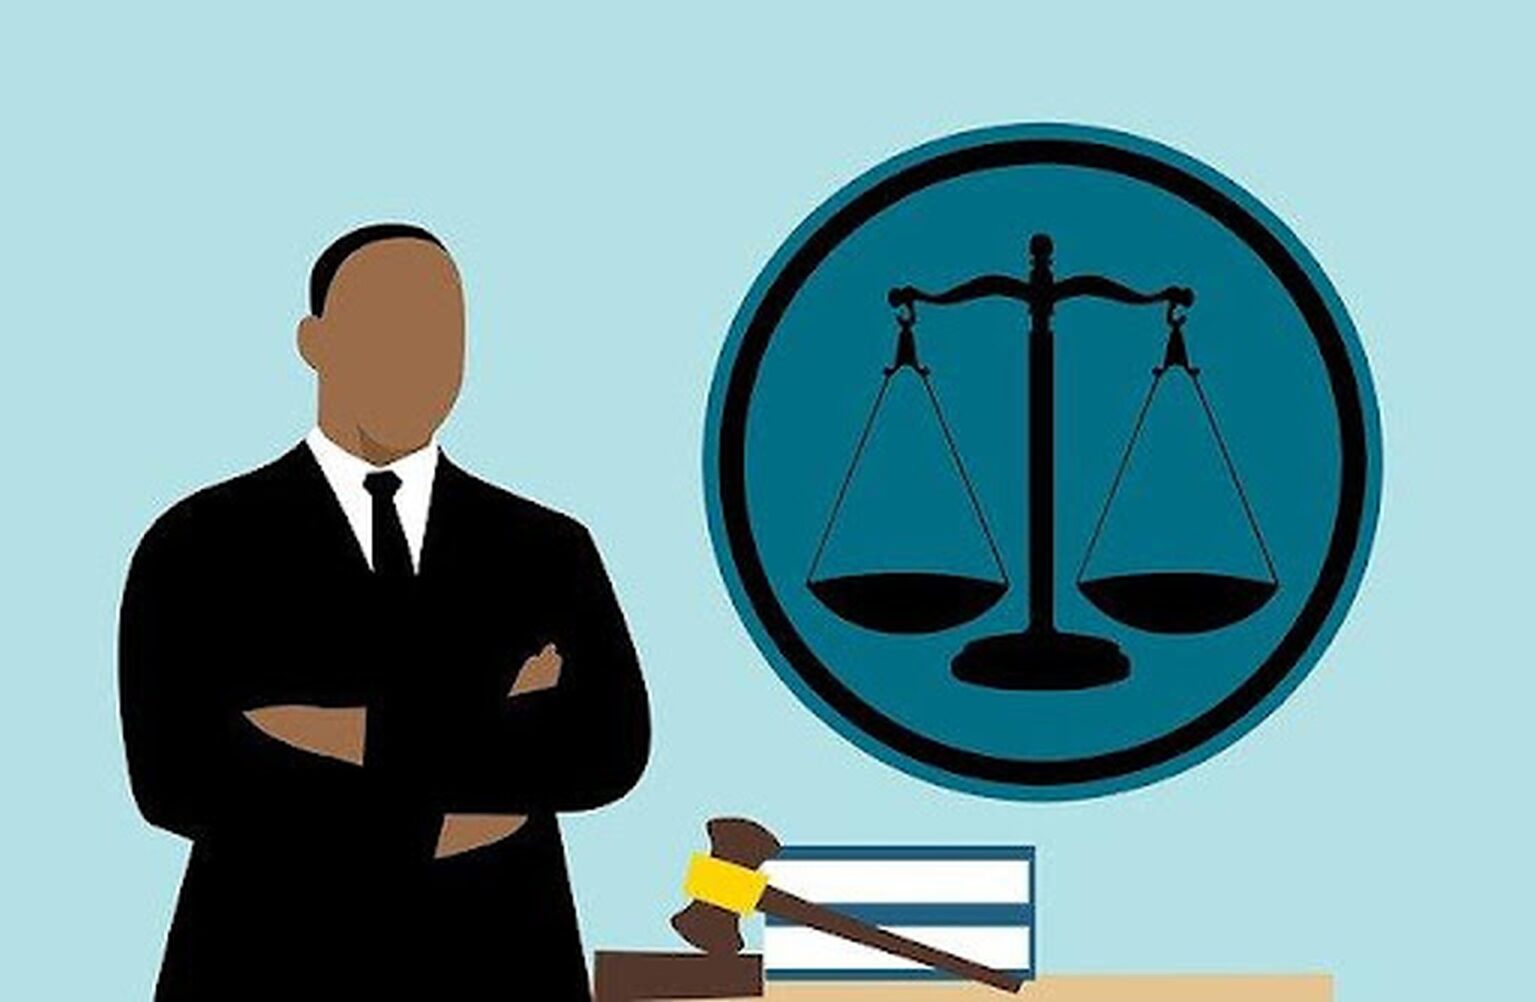 The main difference between a lawyer and a solicitor is that a lawyer is qualified to represent clients in court, while a solicitor is not.